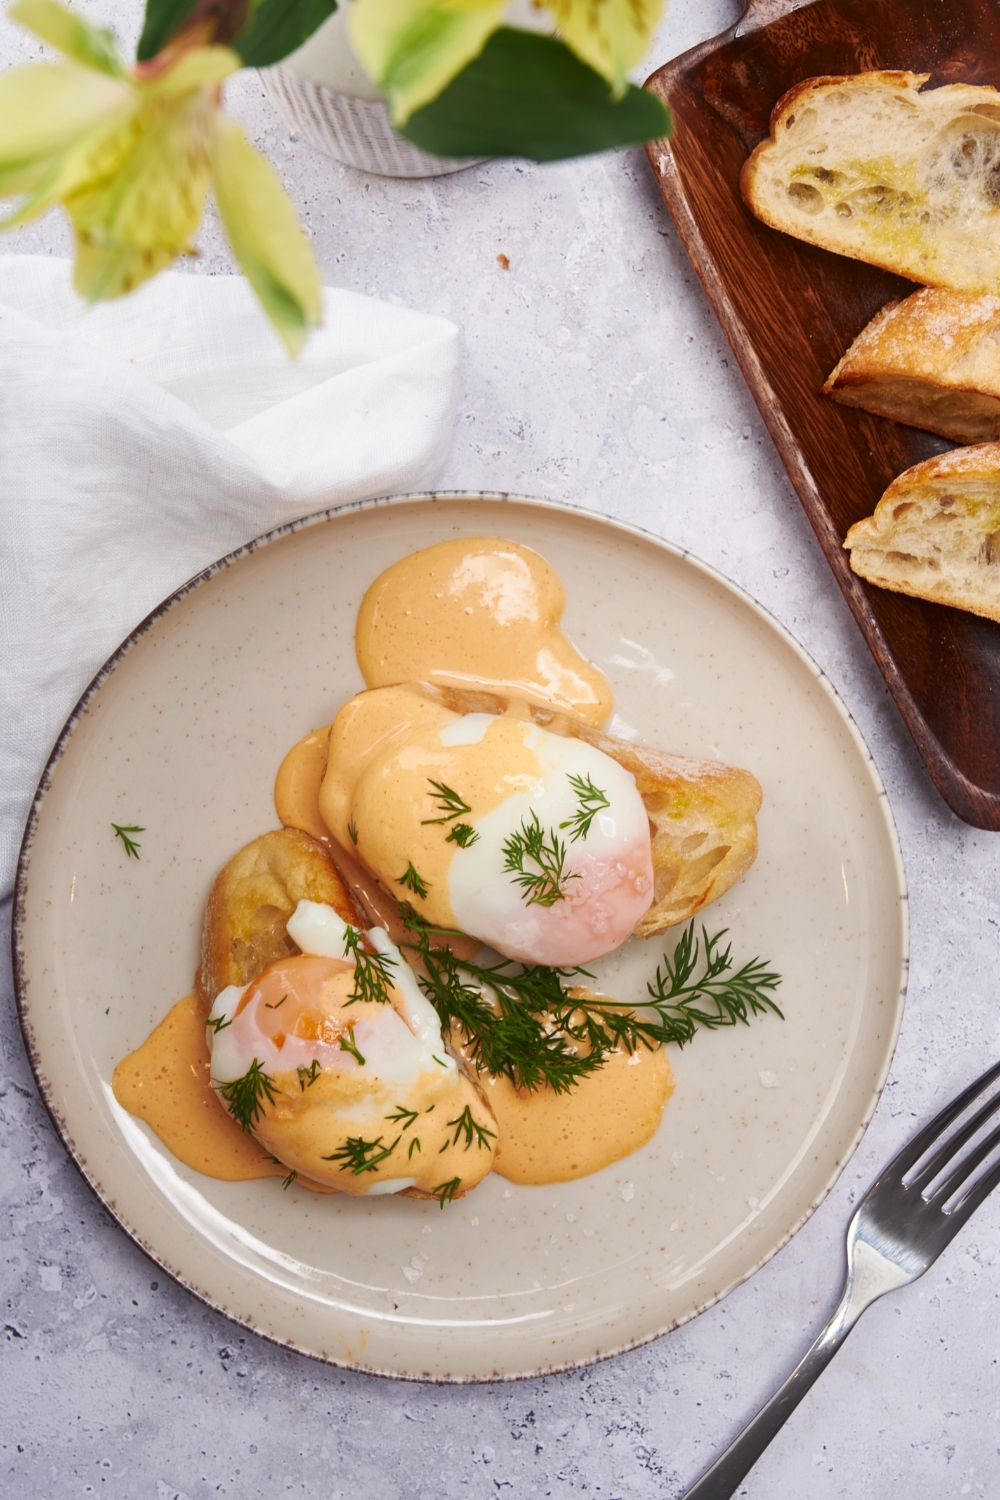 Overhead view of two pieces of toast on a plate, each topped with a poached egg, Hollandaise sauce, and fresh dill.